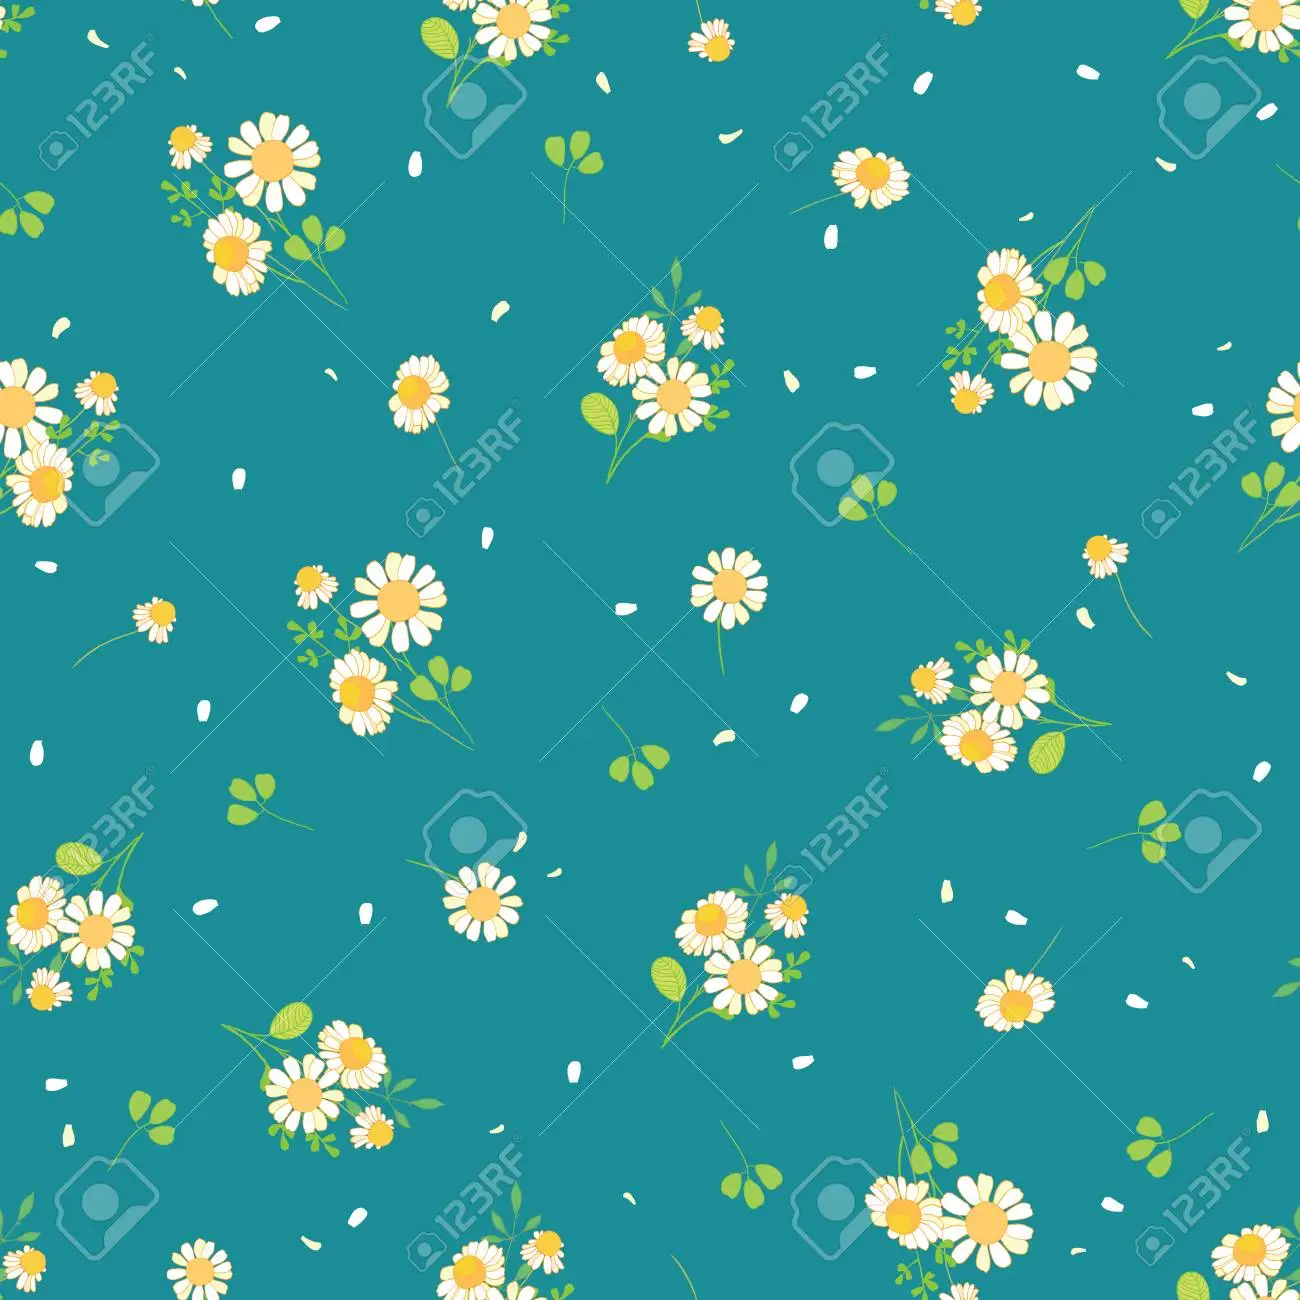 Cute daisies ditsy seamless pattern great for summer vintage fabric scrapbooking wallpaper giftwrap suraface pattern design royalty free svg cliparts vectors and stock illustration image